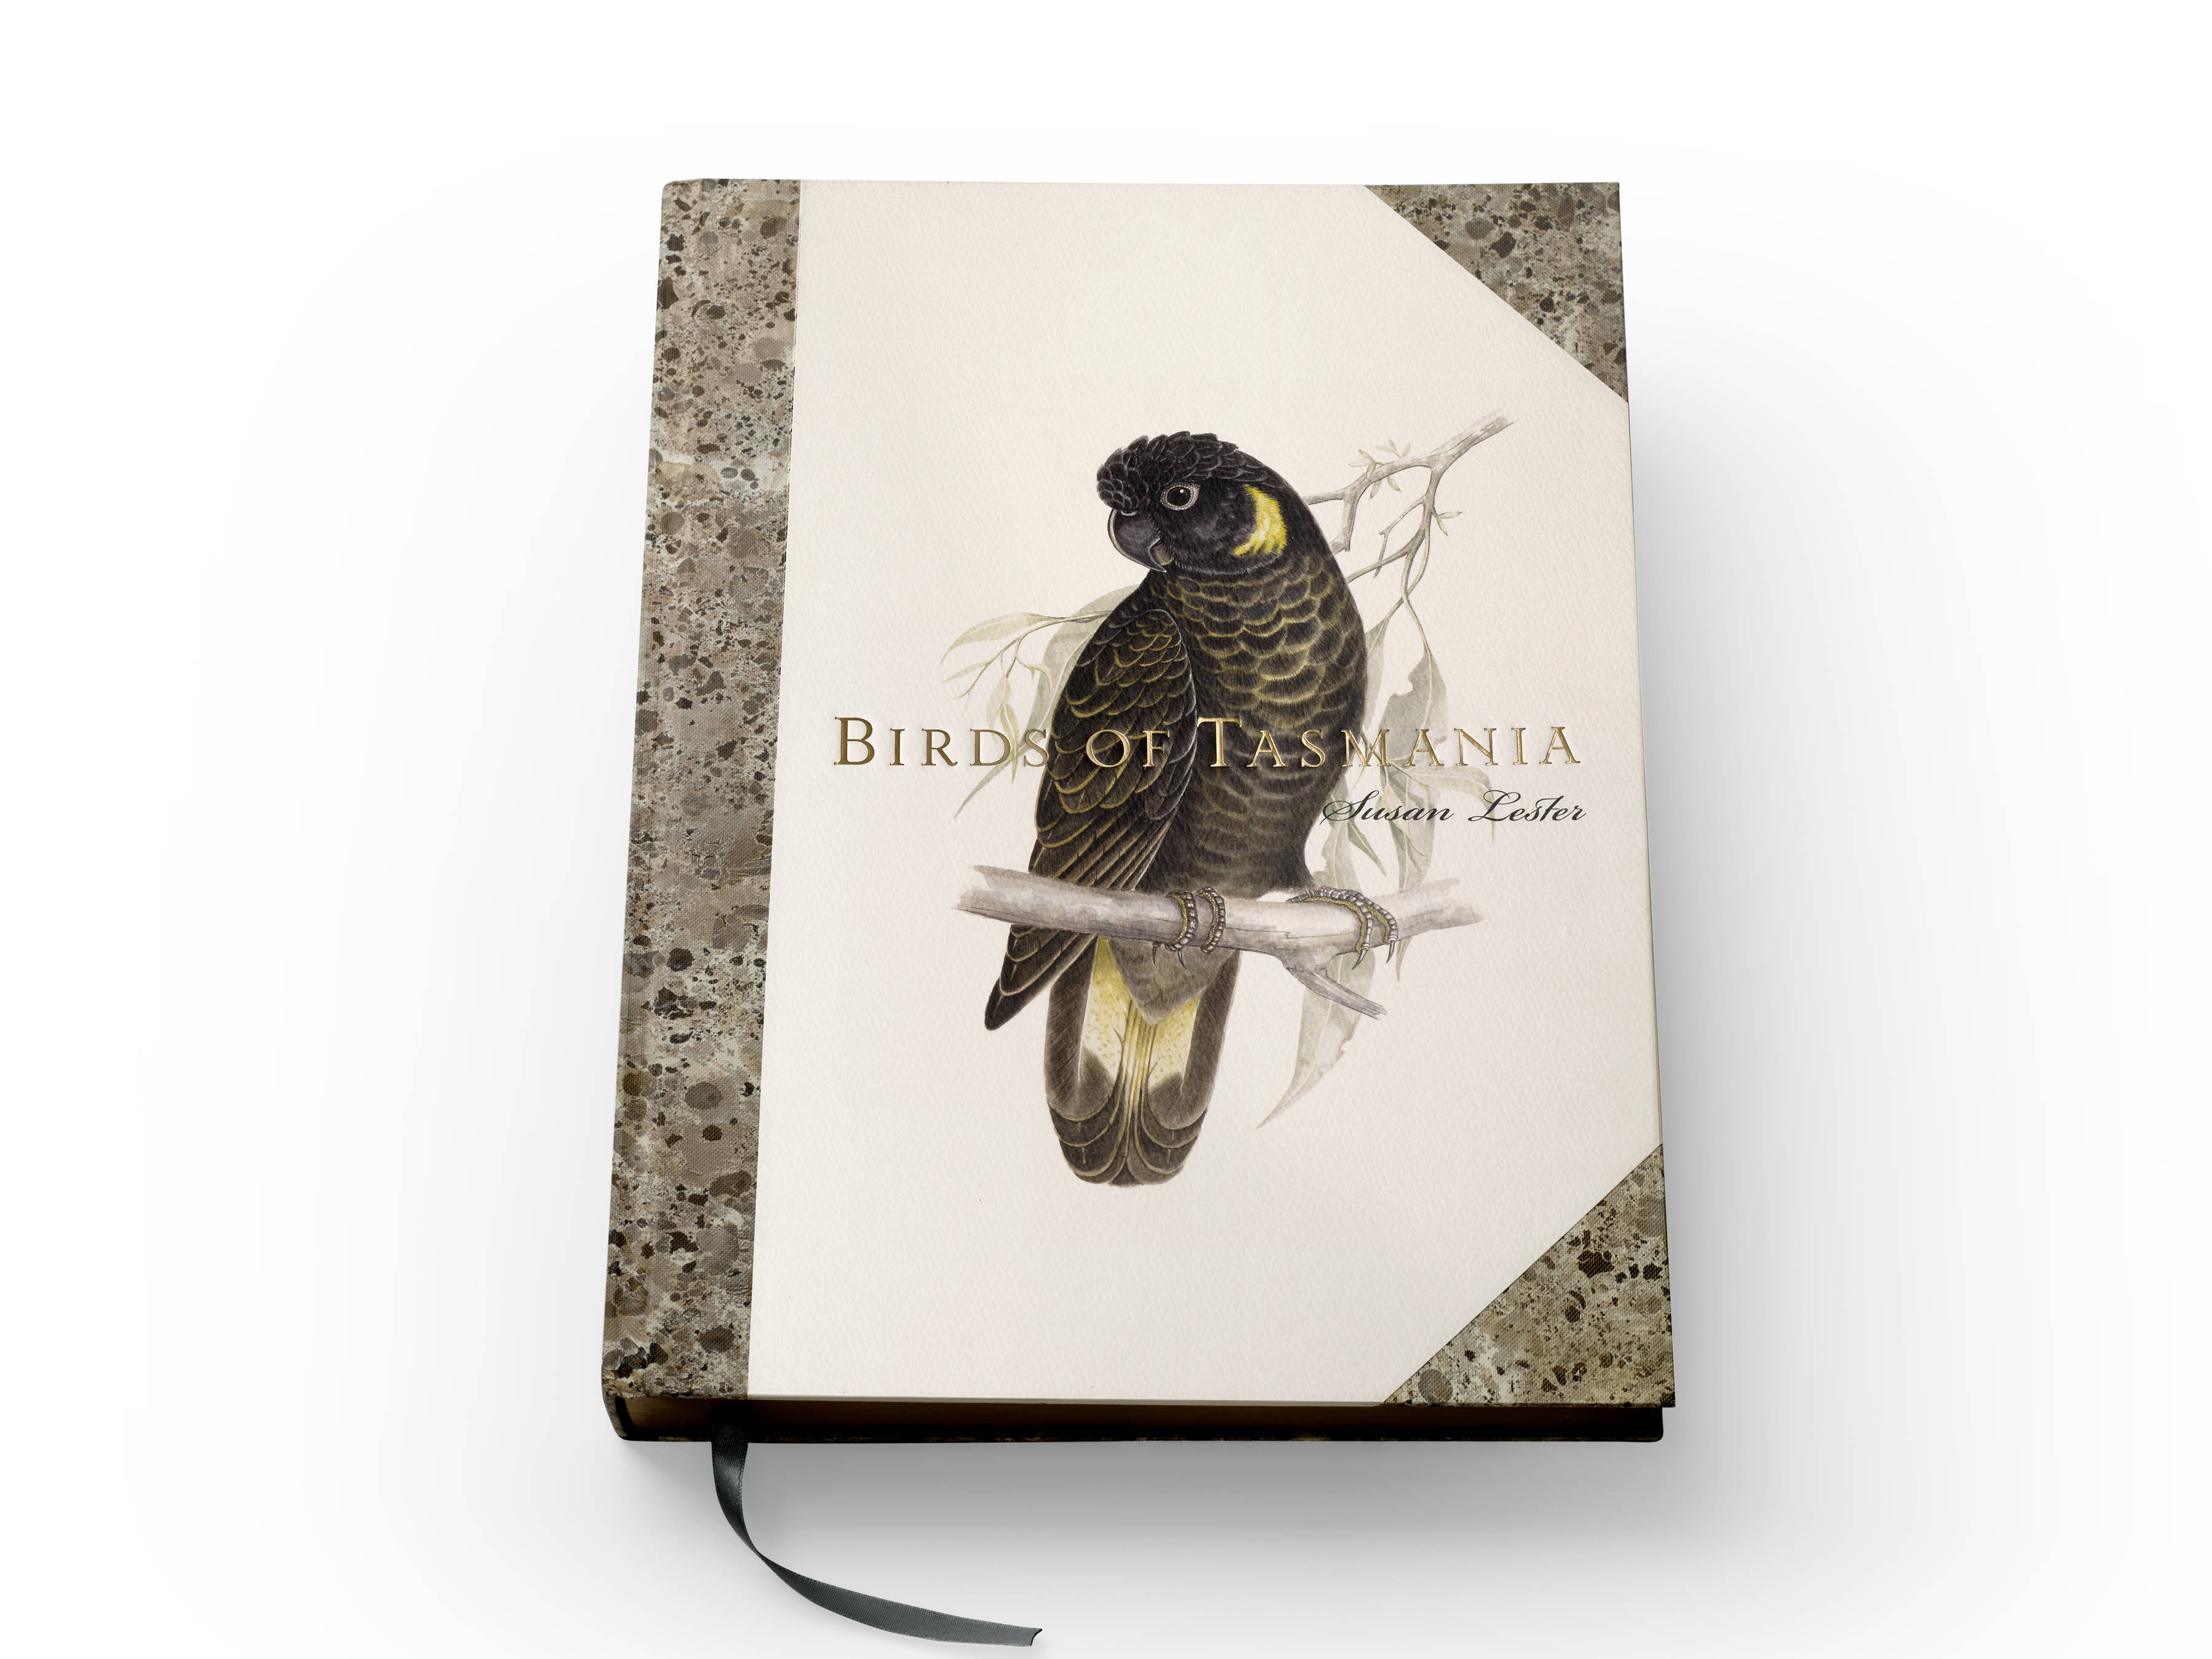 The front cover of the ‘Birds of Tasmania’ by Susan Lester book, with a Yellow-tailed Cockatoo ‘Zanda funerea’ and gold and black foil titling.